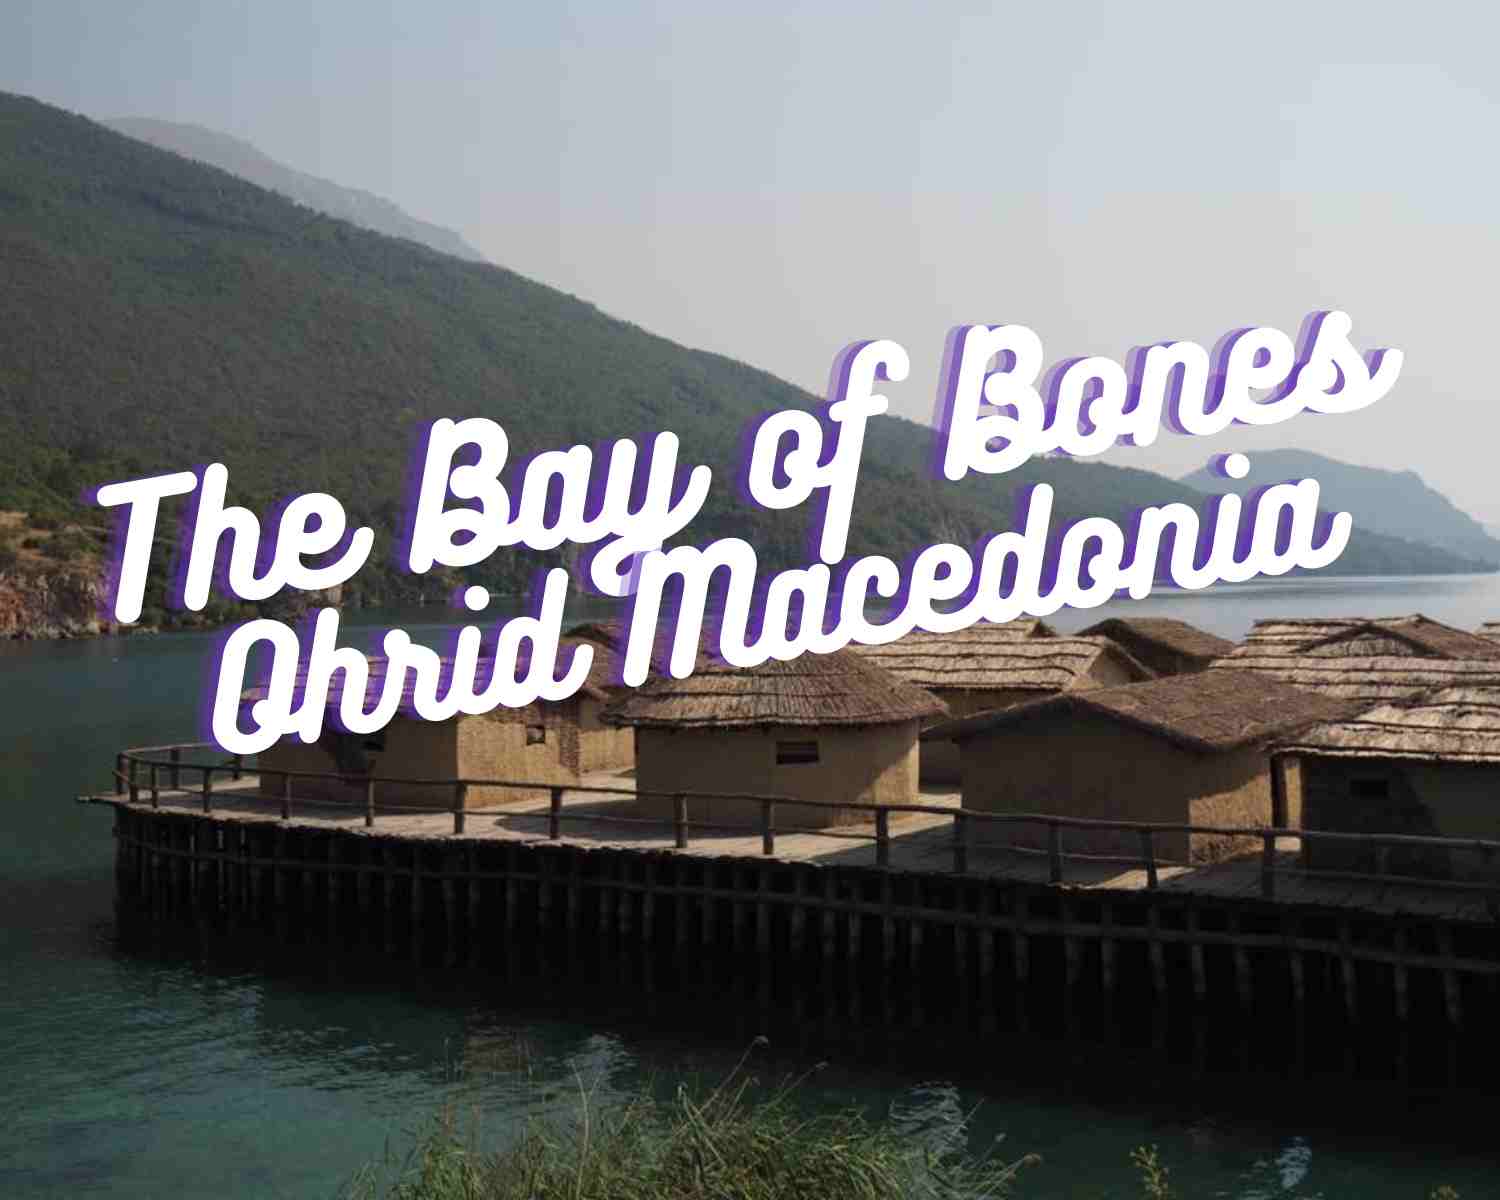 Archaeological site Bay of Bones in North Macedonia